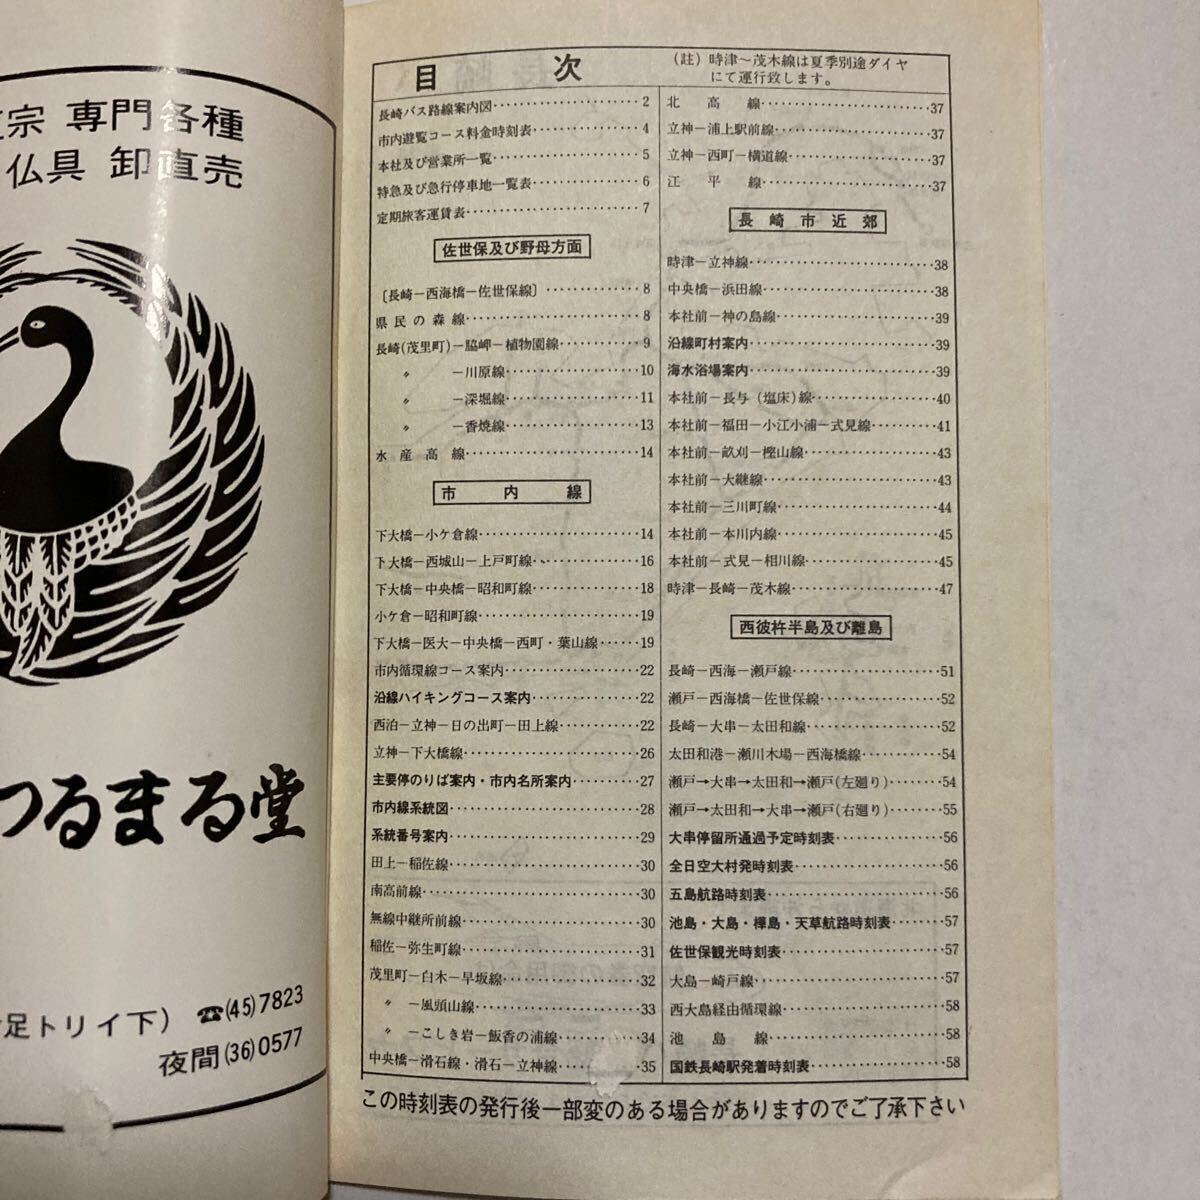  Nagasaki bus timetable /1973 year 11 month presently * Nagasaki automobile corporation / route guide map /.. block ~ river ./ under large .~ on door block / west .~ rice field on / head office front ~. cape / Nagasaki ~ Oota peace 